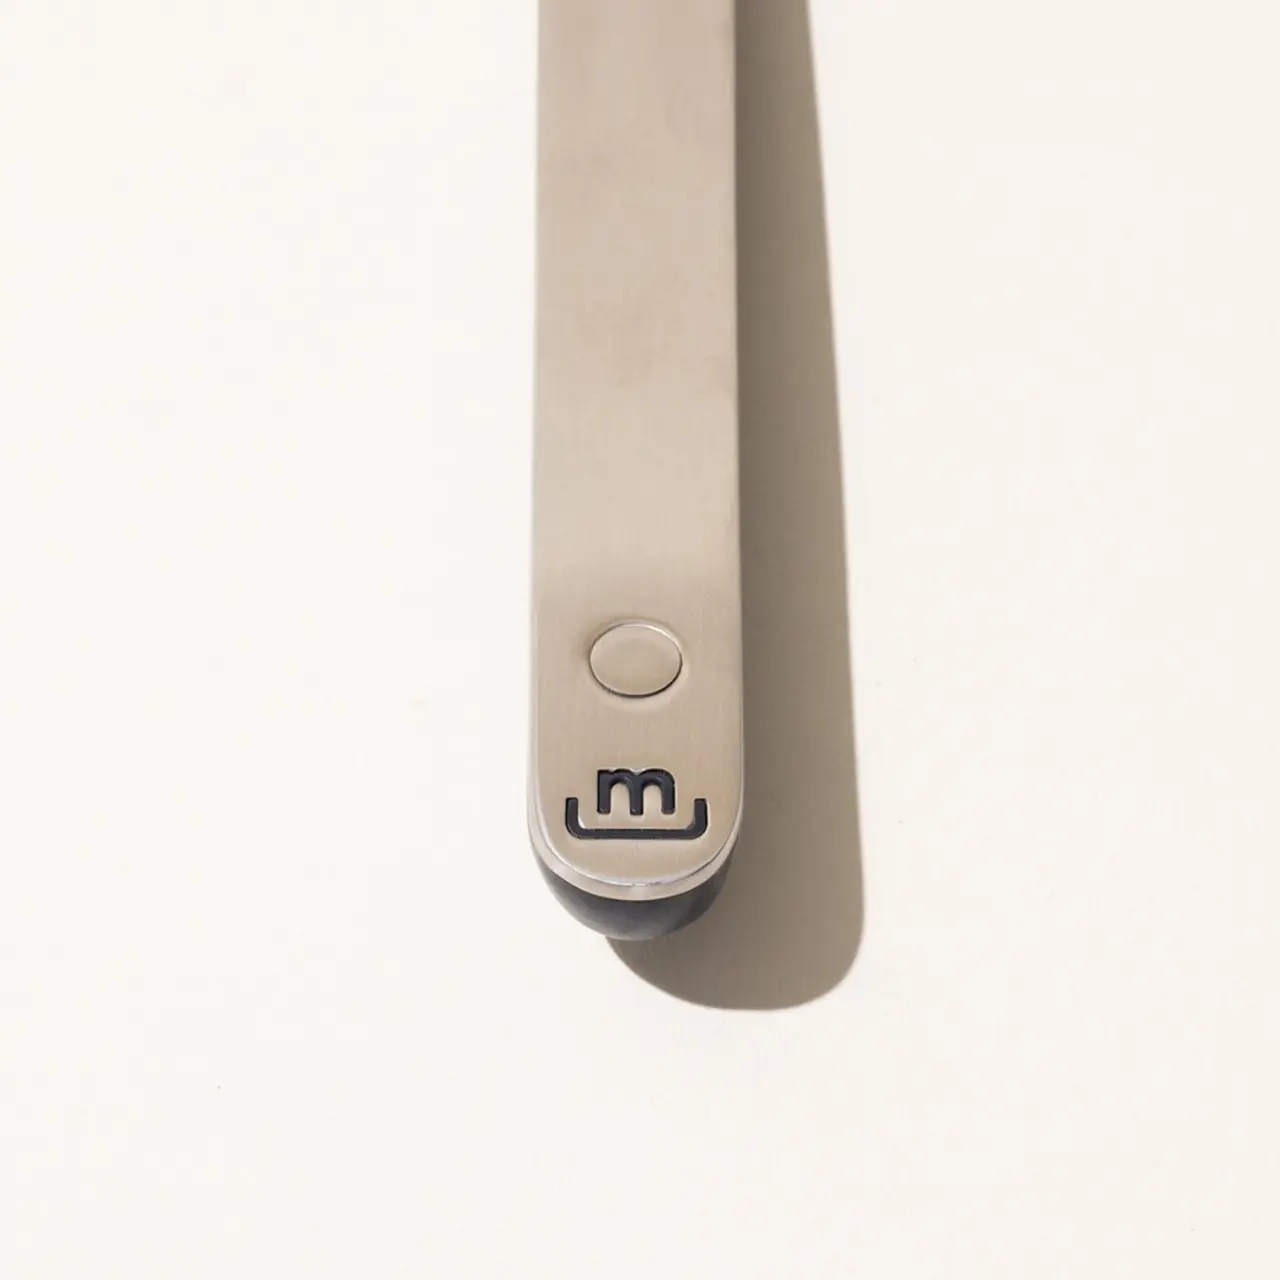 A close-up of a sleek electronic device with a single button and a logo resembling the letter "m" on a plain background.